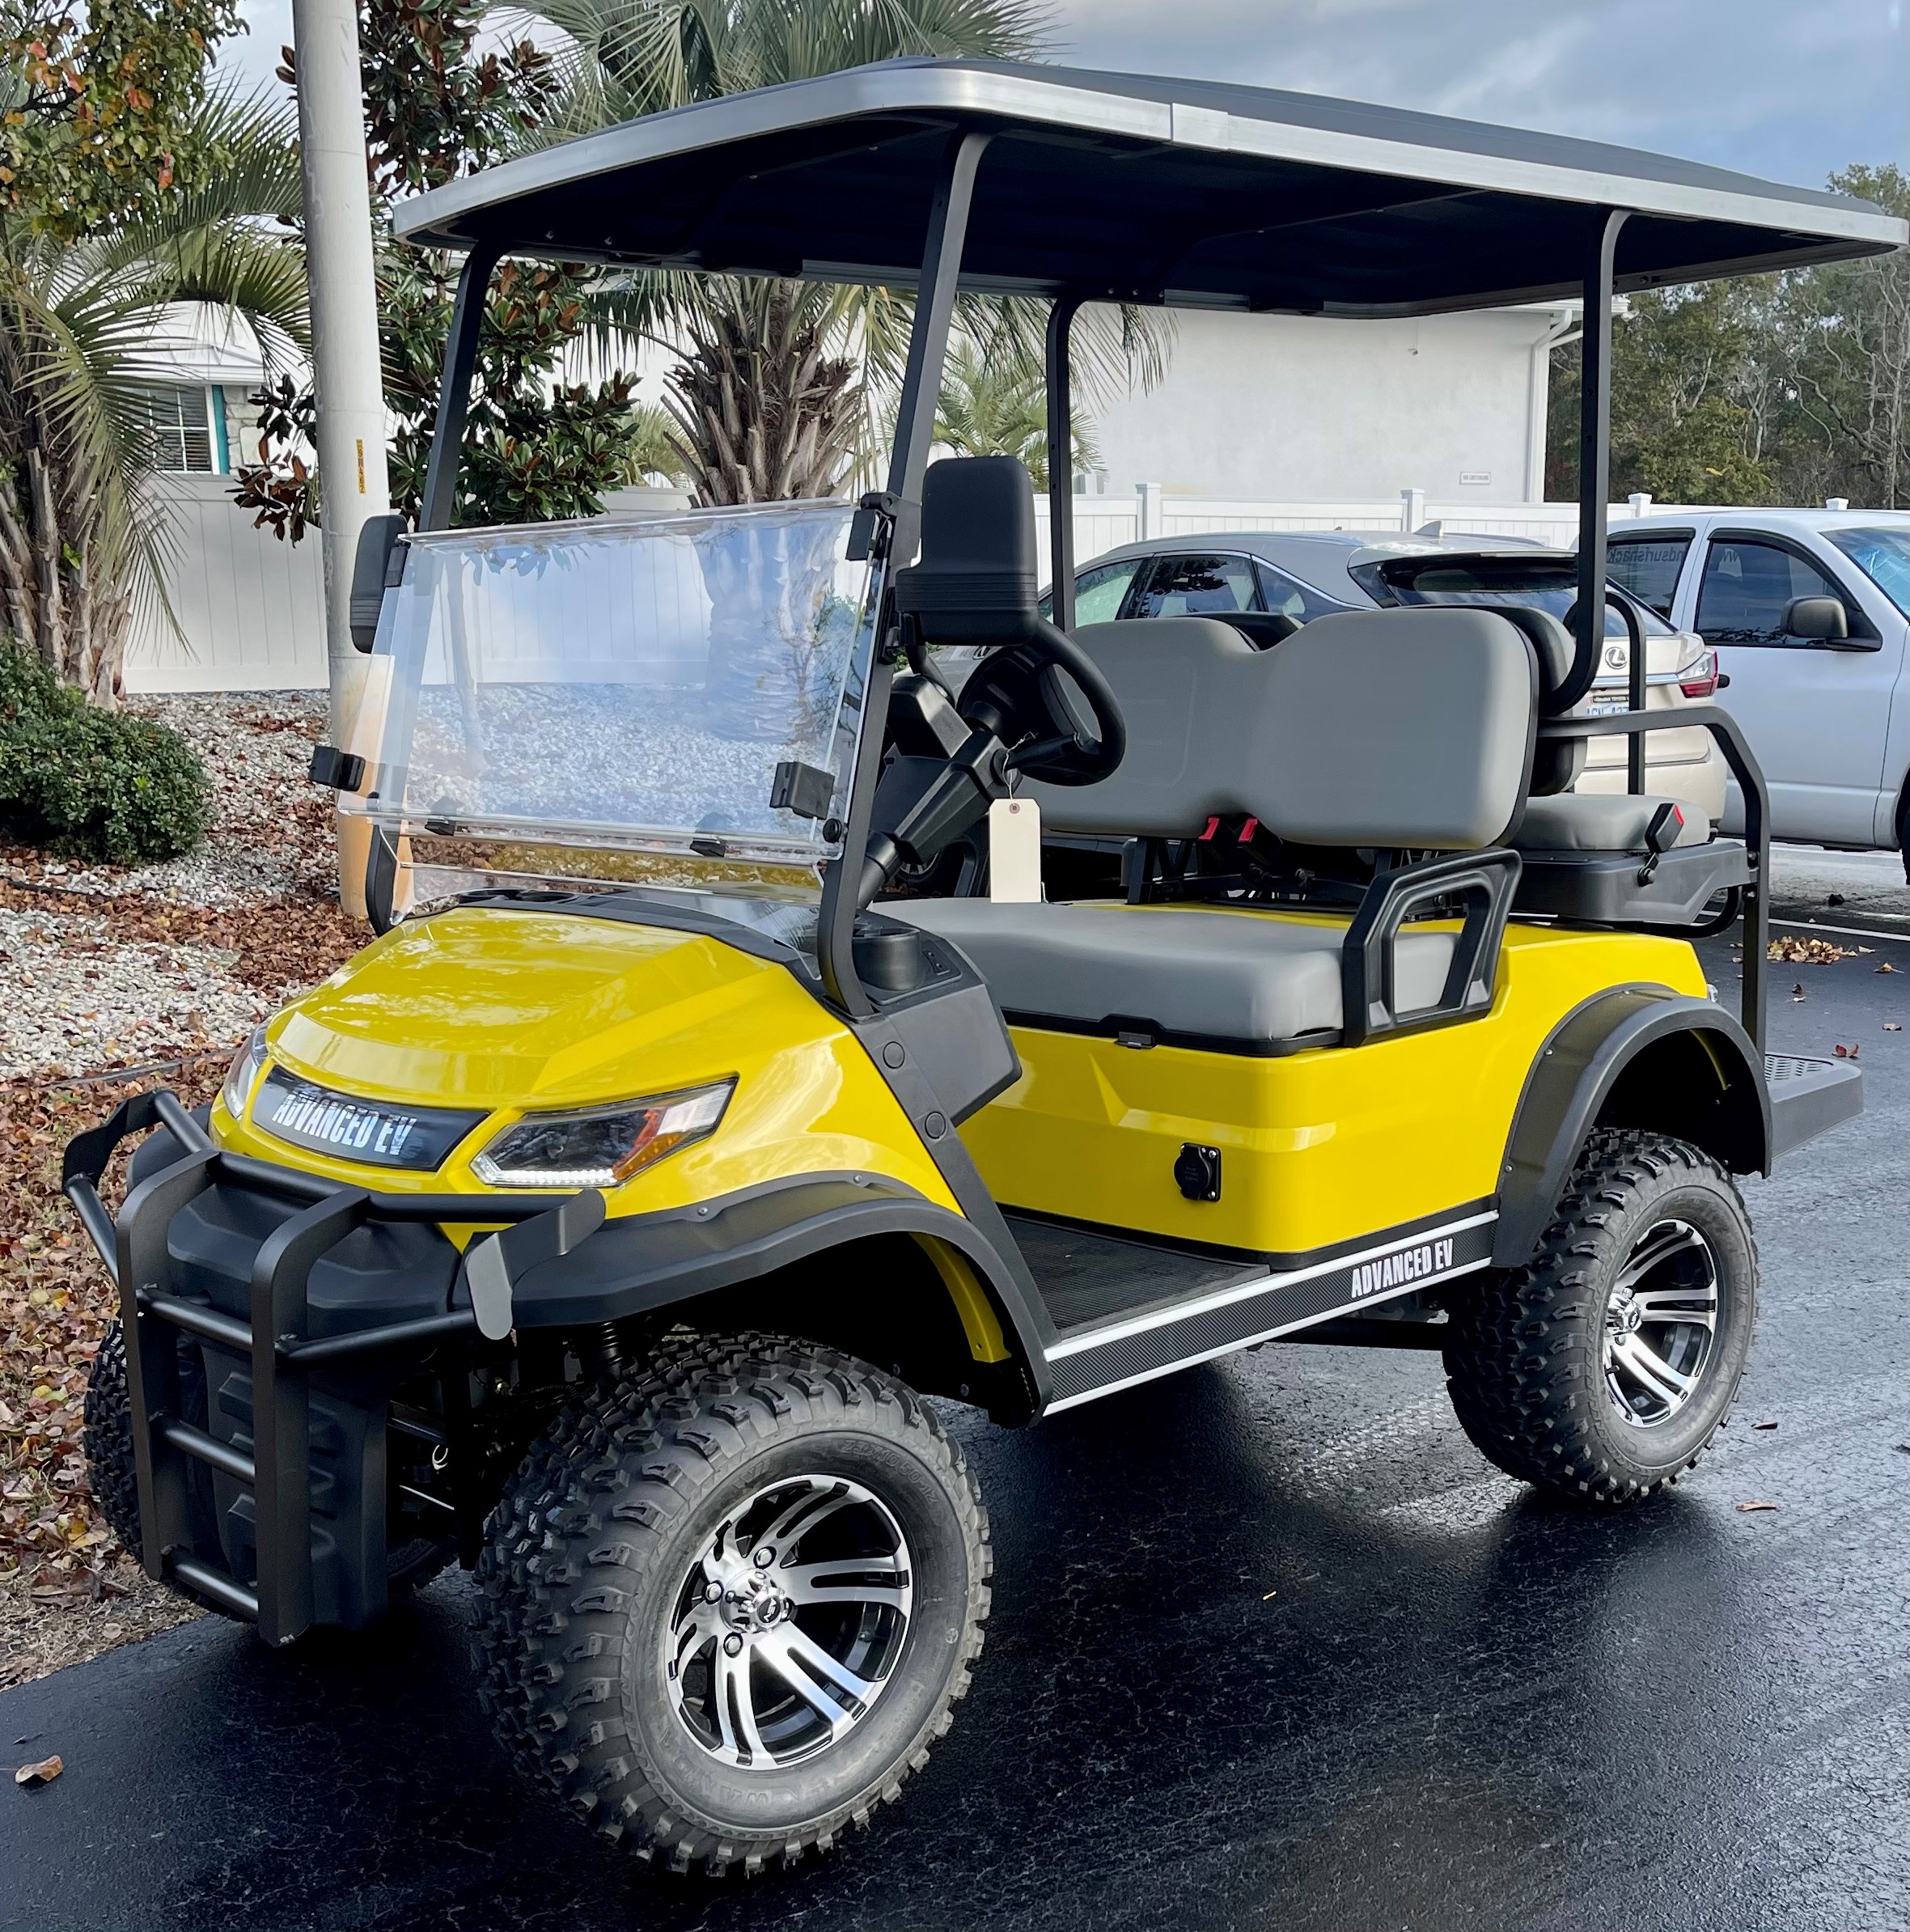 2022 AdvancedEV 4 Passenger Lifted GENERATION 2 WITH 105 AMP LITHIUM BATTERY